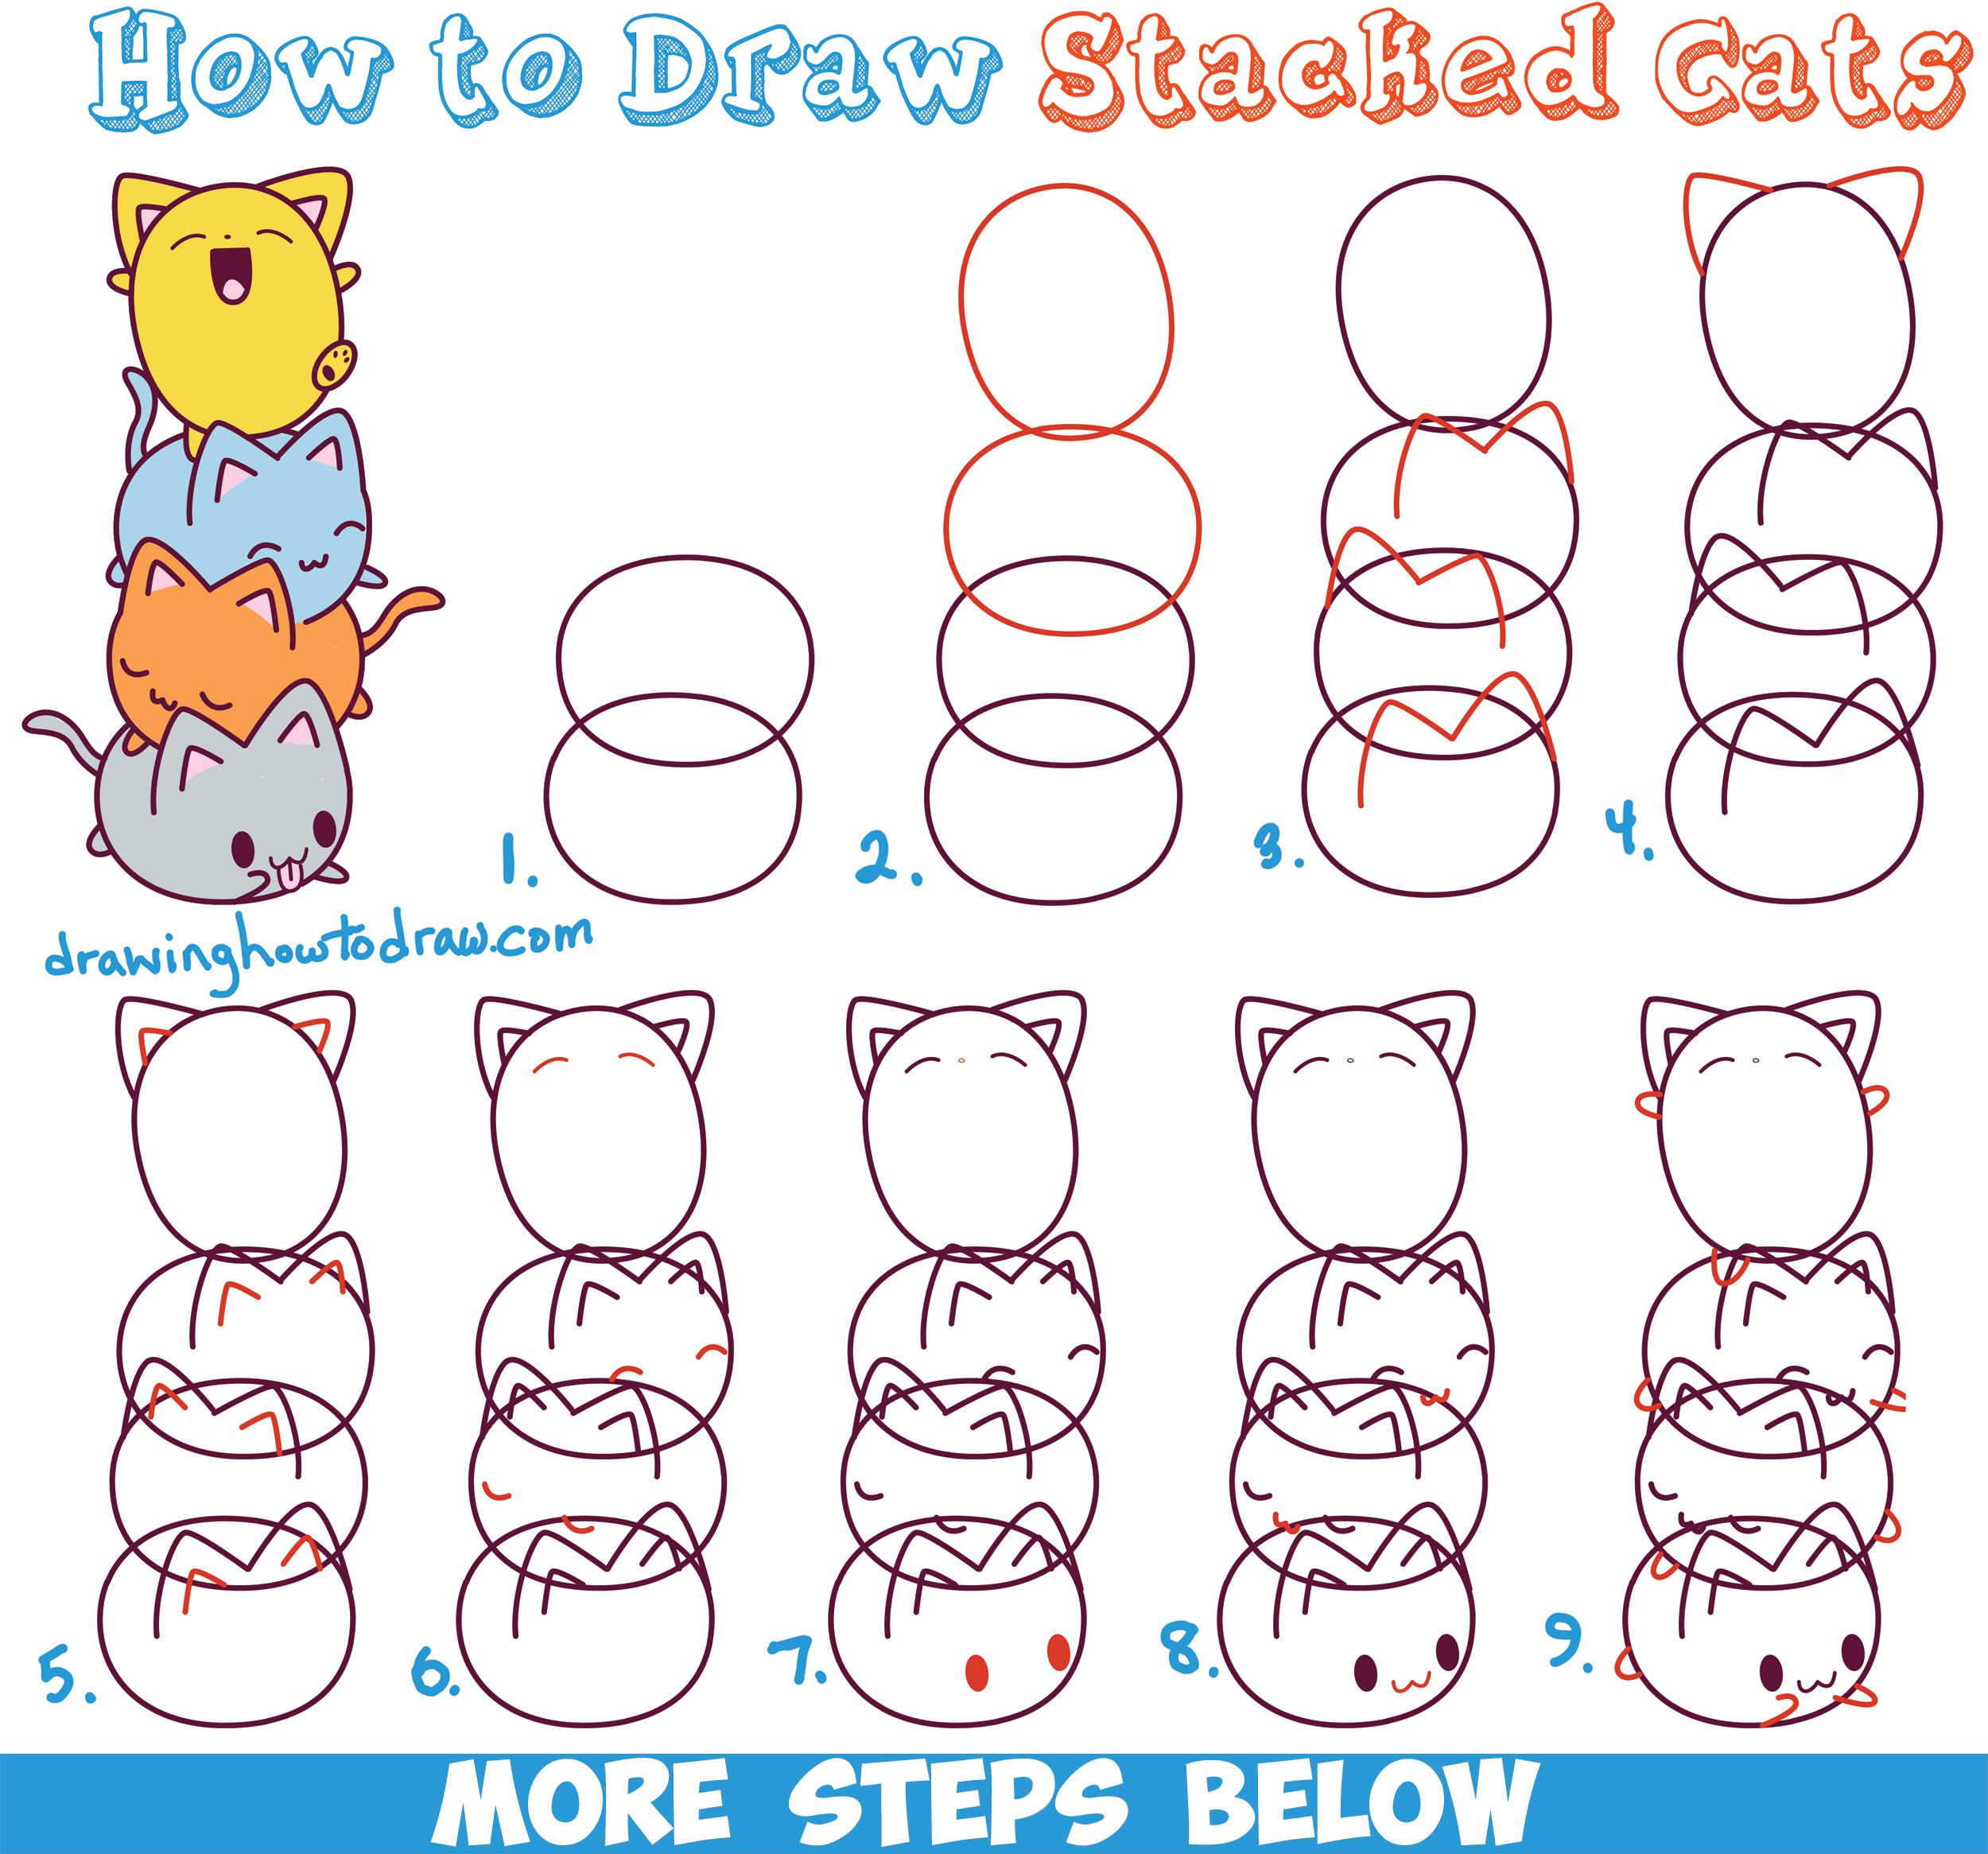 How To Draw Cute Kawaii Cats Stacked On Top Of Each Other - Easy Step By Step Drawing Tutorial For Kids - How To Draw Step By Step Drawing Tutorials